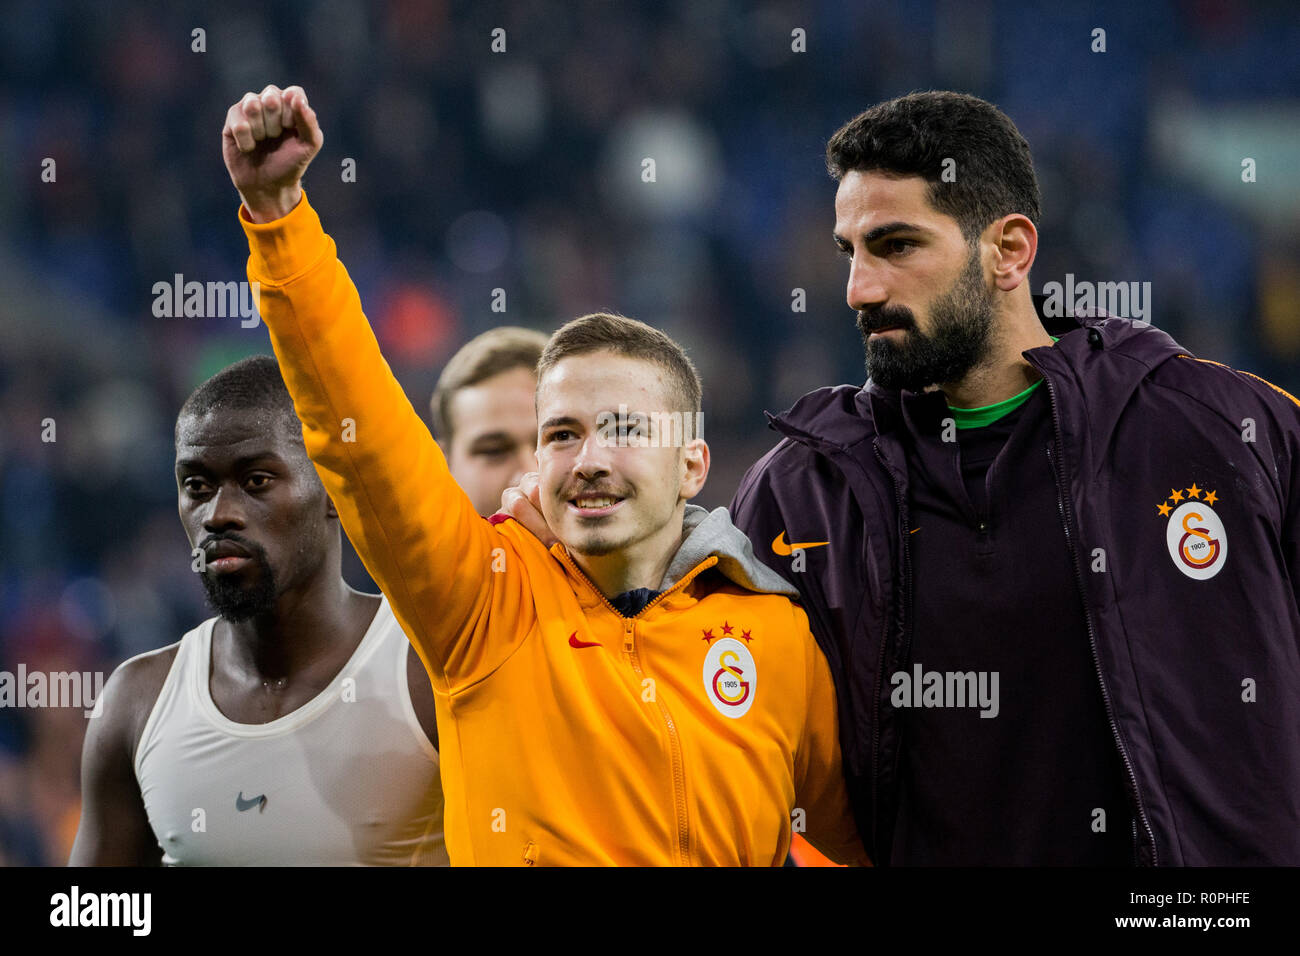 Gelsenkirchen, Germany. 06th Nov, 2018. Soccer: Champions League, FC  Schalke 04 - Galatasaray Istanbul, Group stage, Group D, Matchday 4 in the  Veltins Arena. A Galatasaray fan who has stormed the pitch